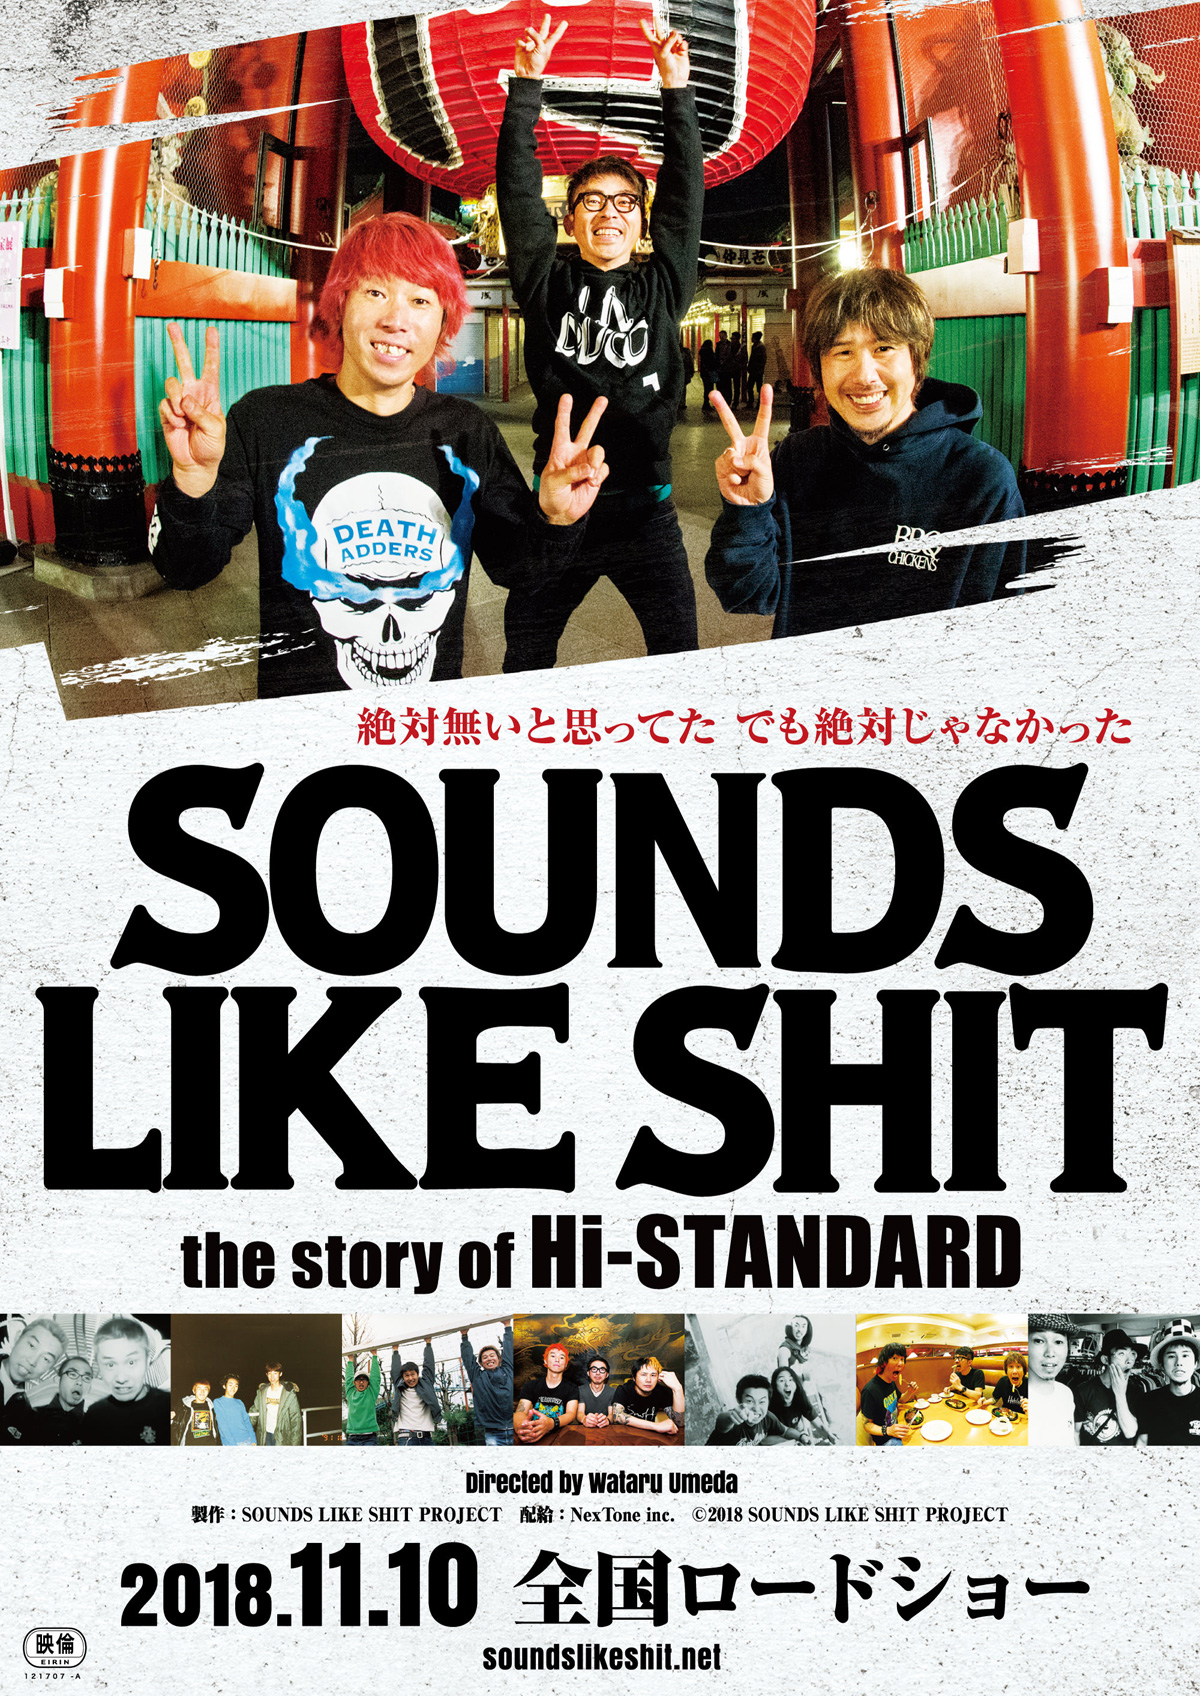 SOUNDS LIKE SHIT　the story of Hi-STANDARDの画像